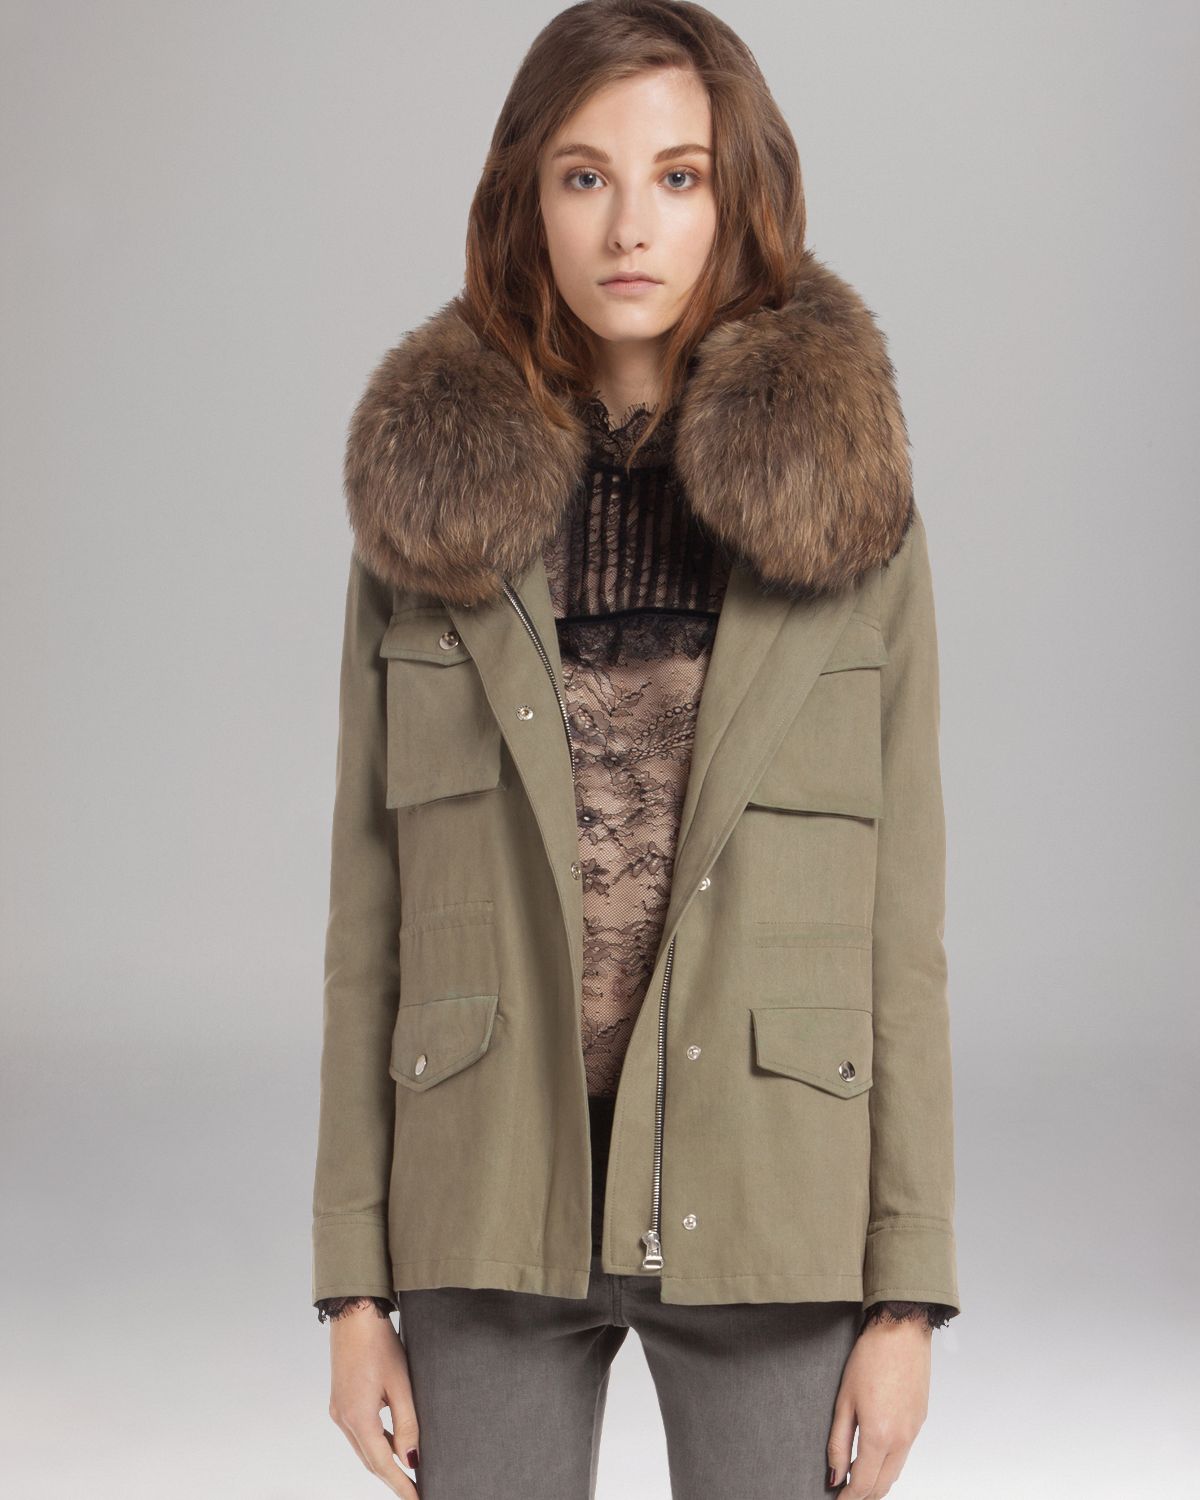 Lyst - Maje Parka Military Fur Collar in Natural